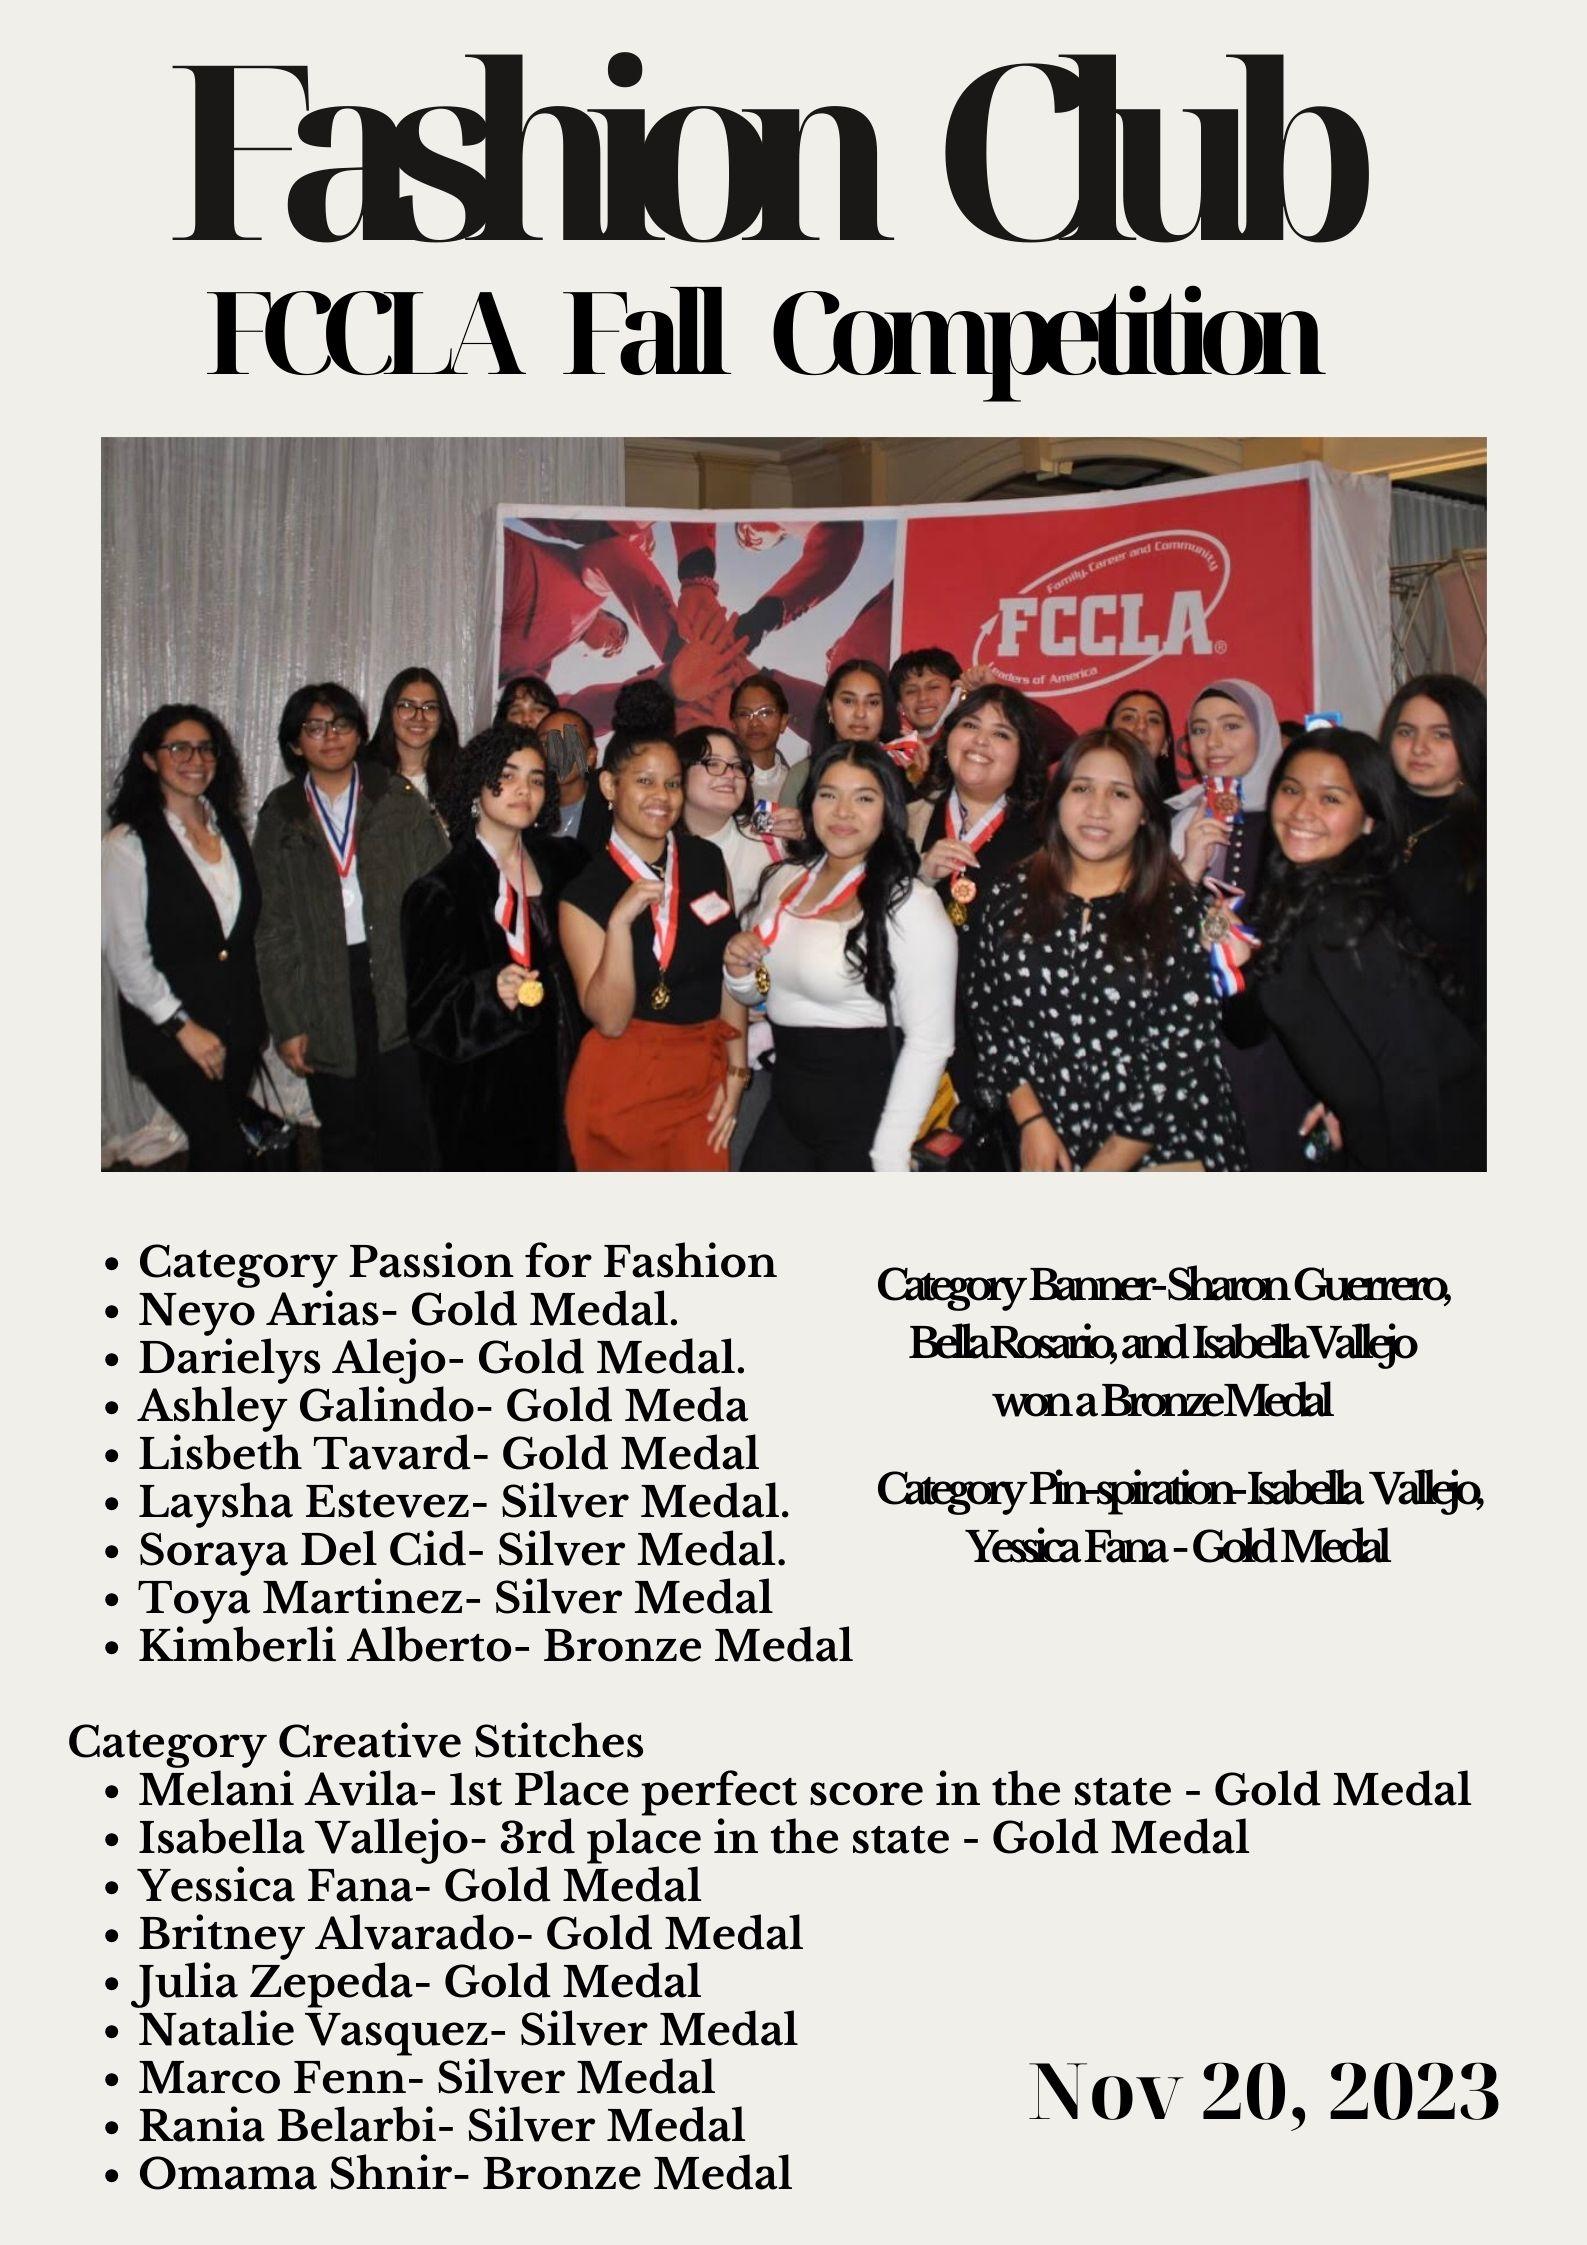 Congratulations To The FCCLA Students at Union City High School